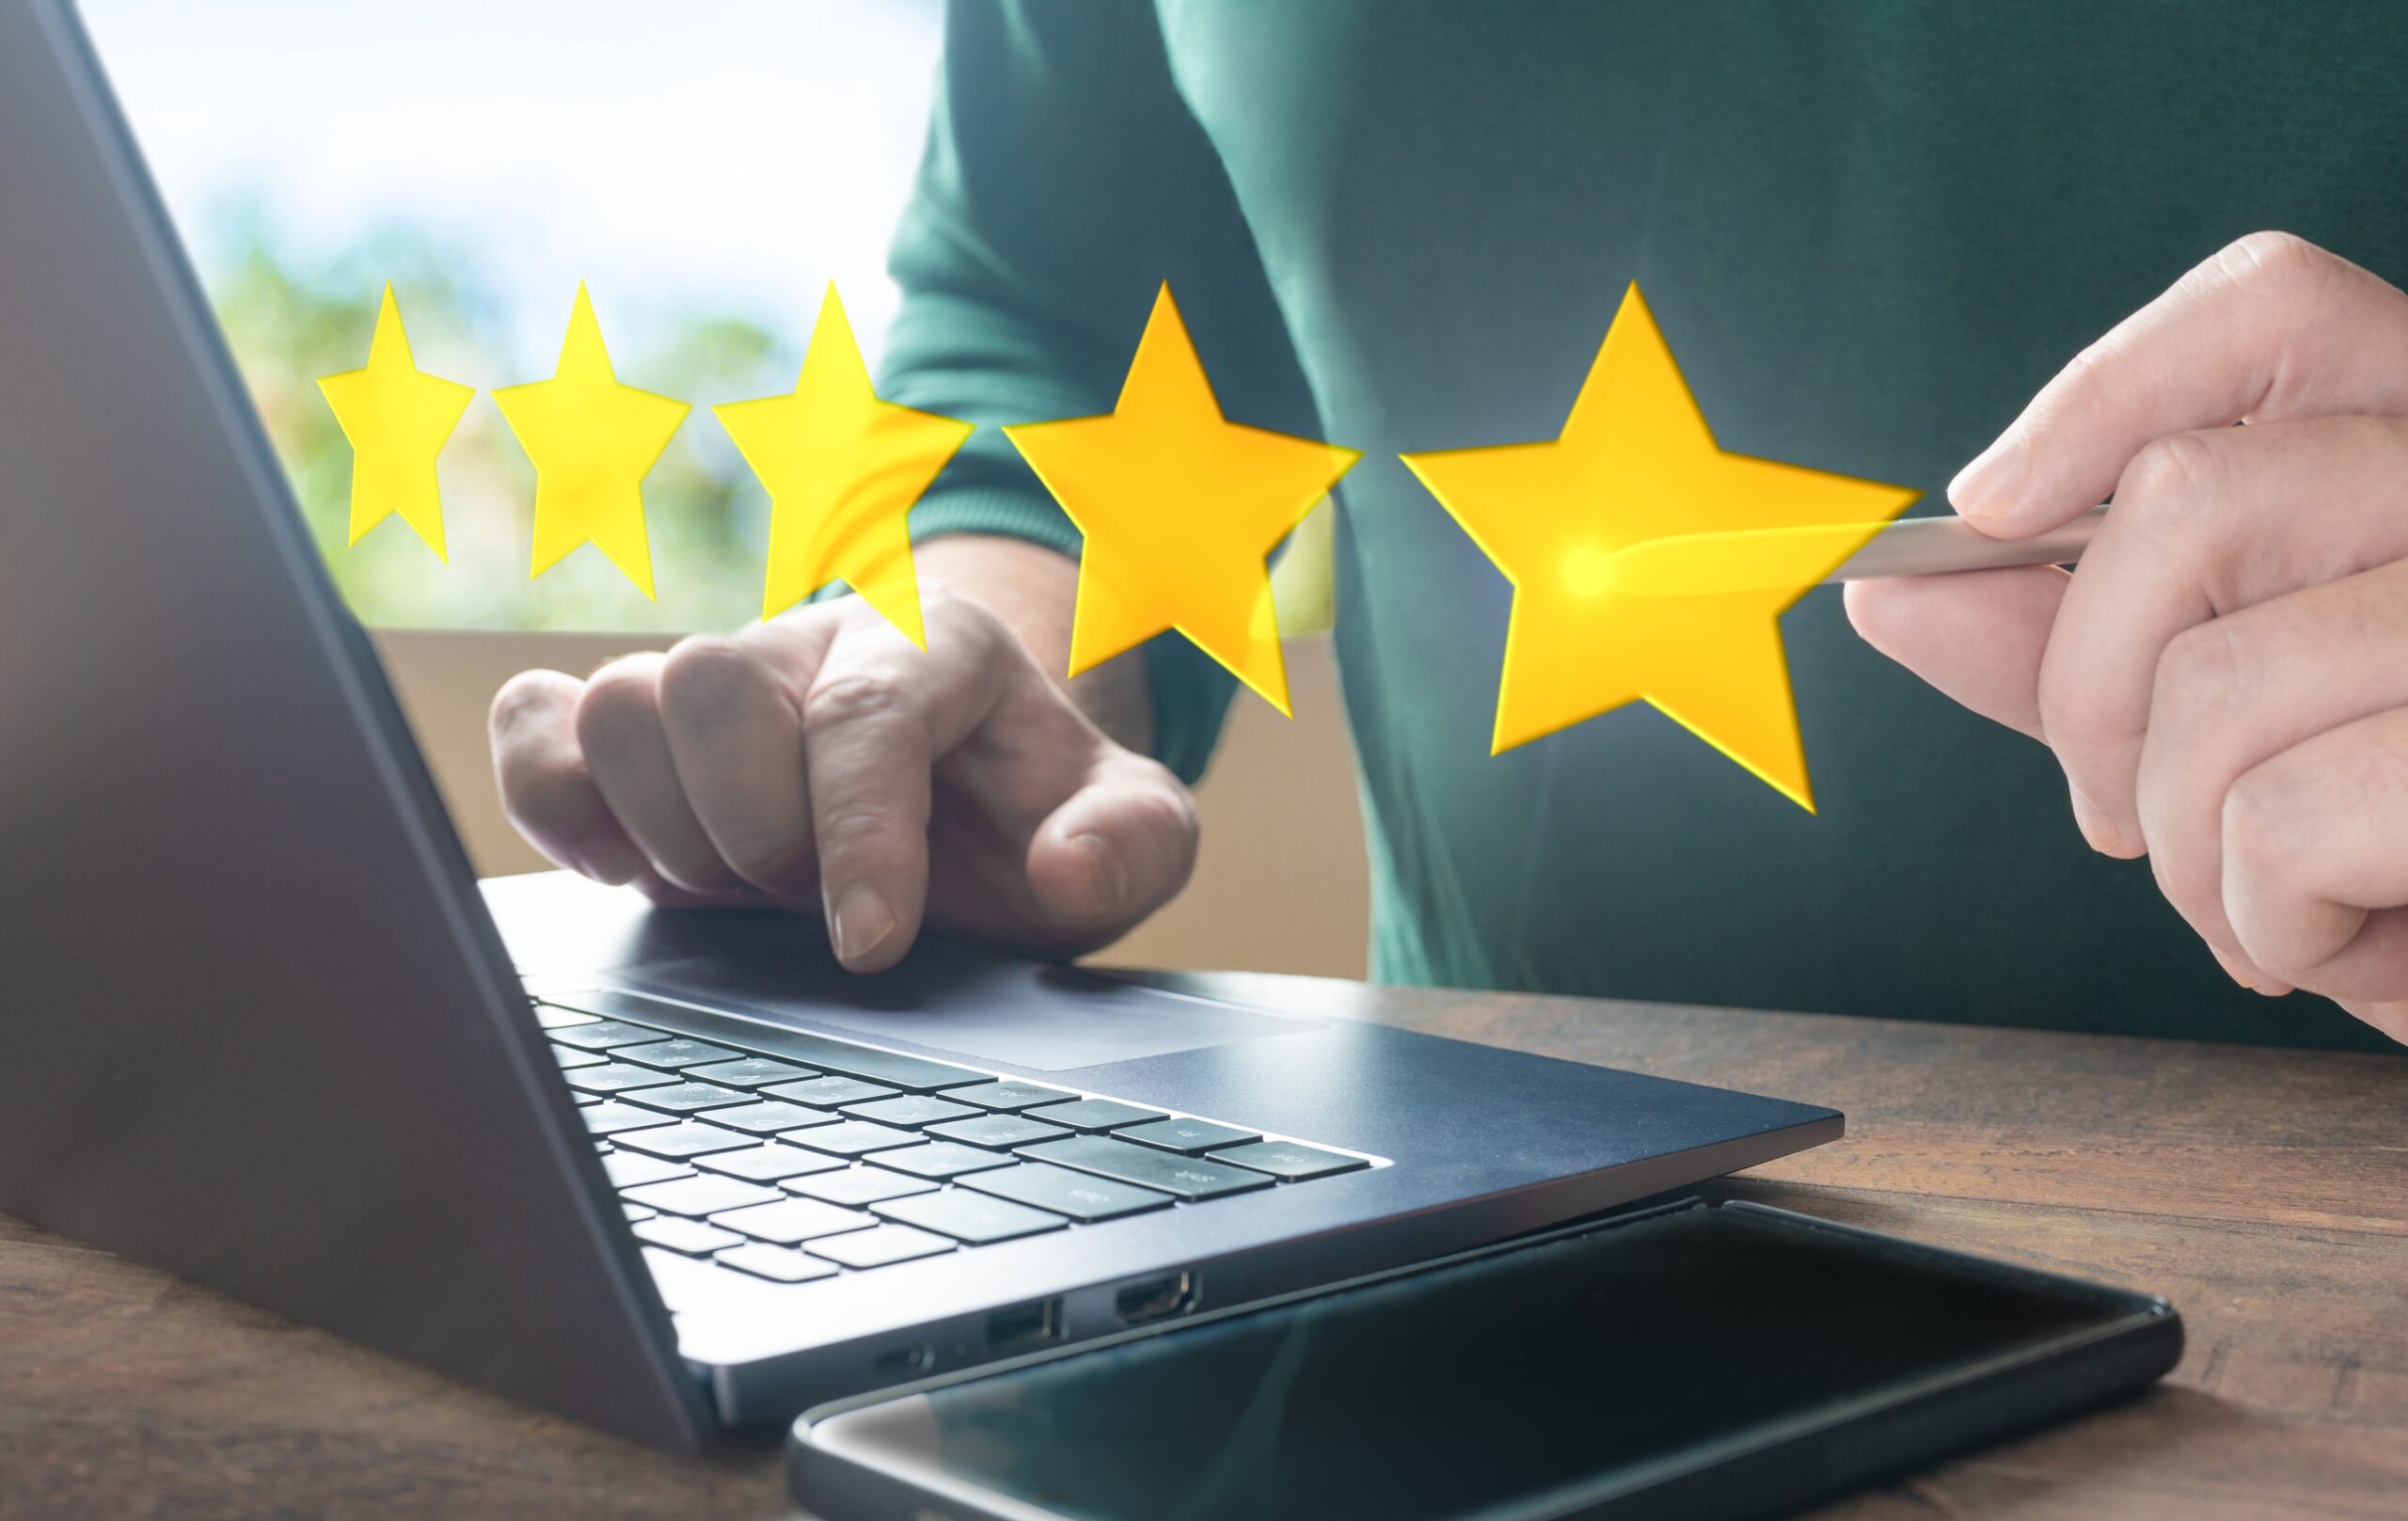 five-star-rating-hand-evaluate-product-purchased-online-rating-seller-five-star-rating-rise-increasing-5stars-hand-increase-rating-evaluation-classification-concept